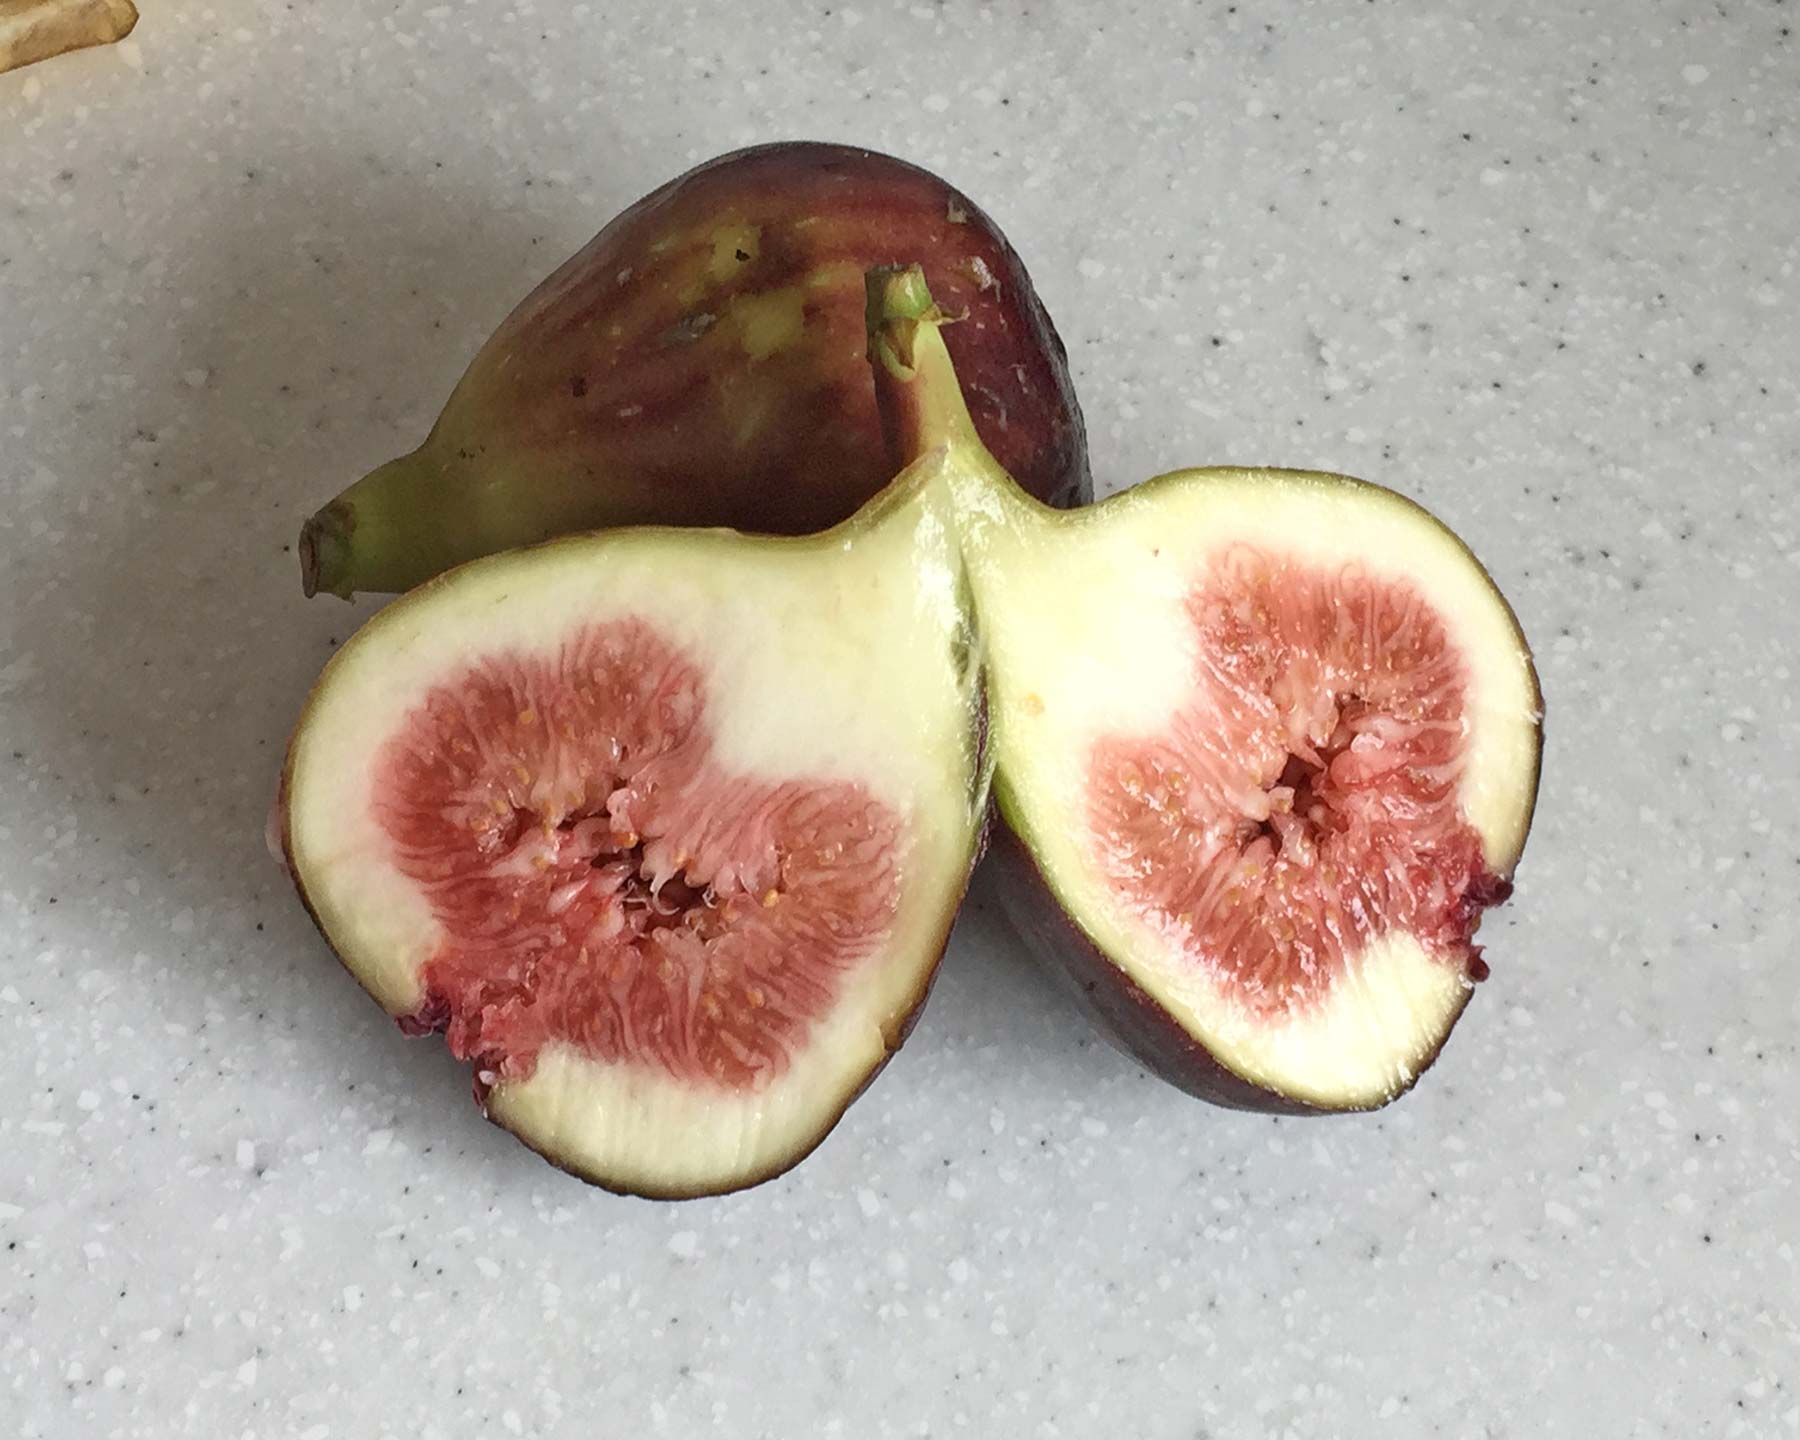 Common Fig - fresh figs are often served with cheese.